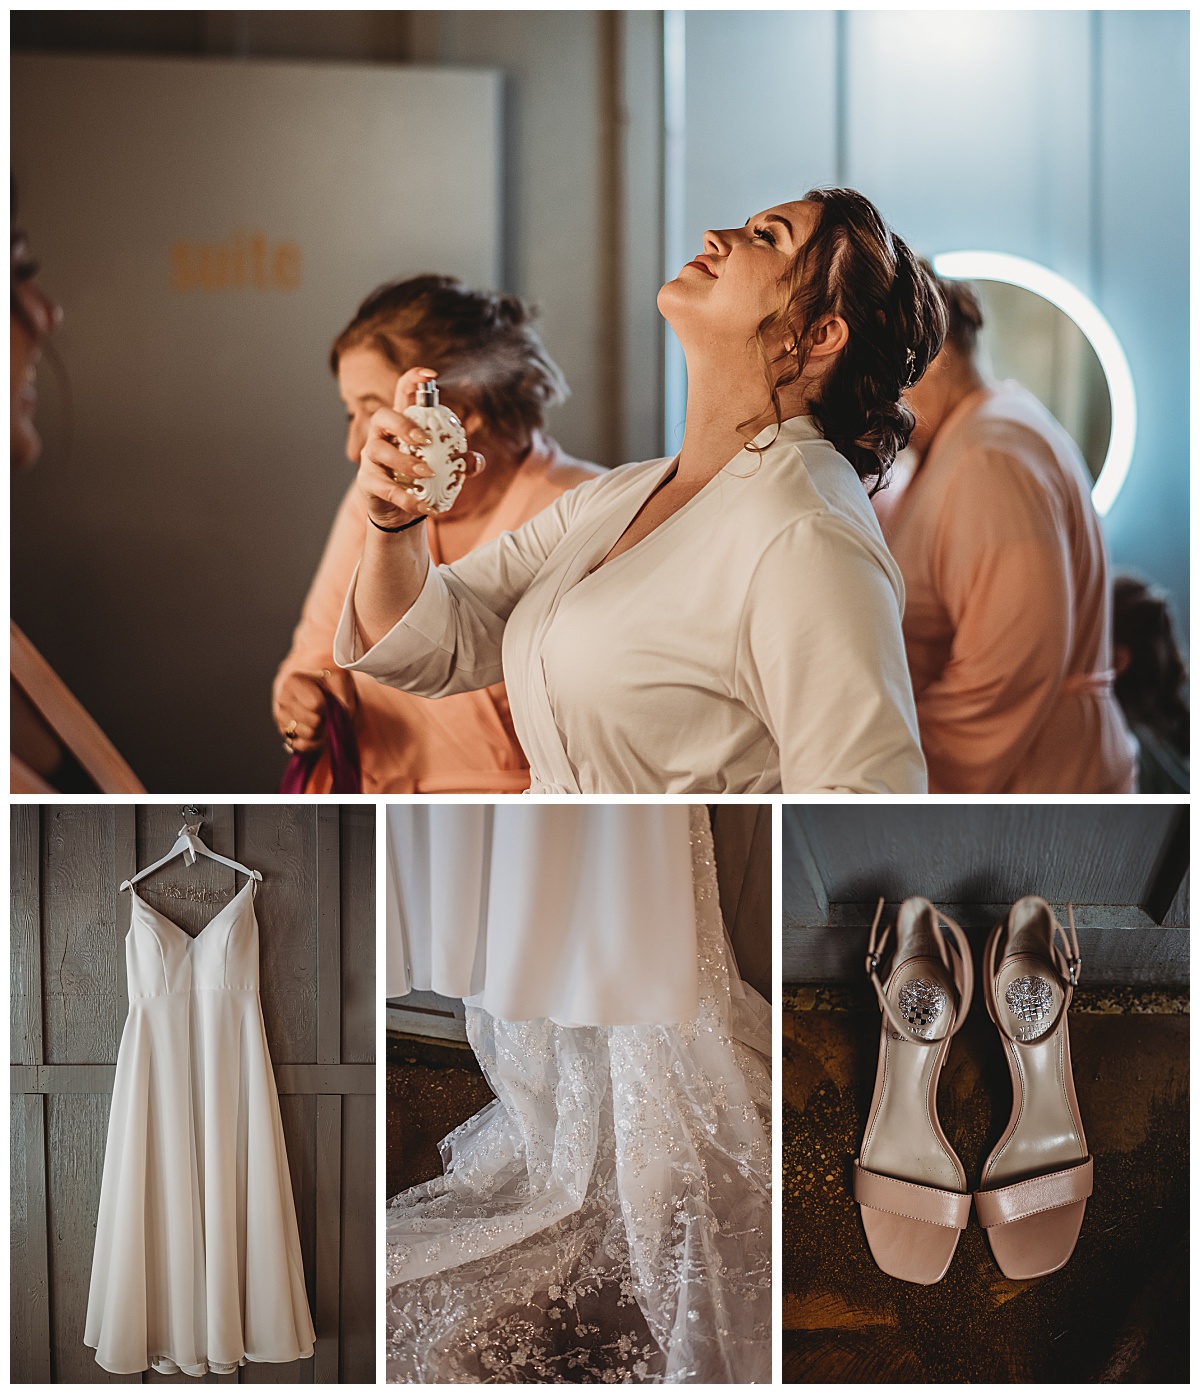 Bride getting ready photo and wedding dress details for a summer wedding at Mainstreet Ballroom in Ellicott City, MD captured by Brittany Dunbar Photography, an Ellicott City Wedding Photographer.